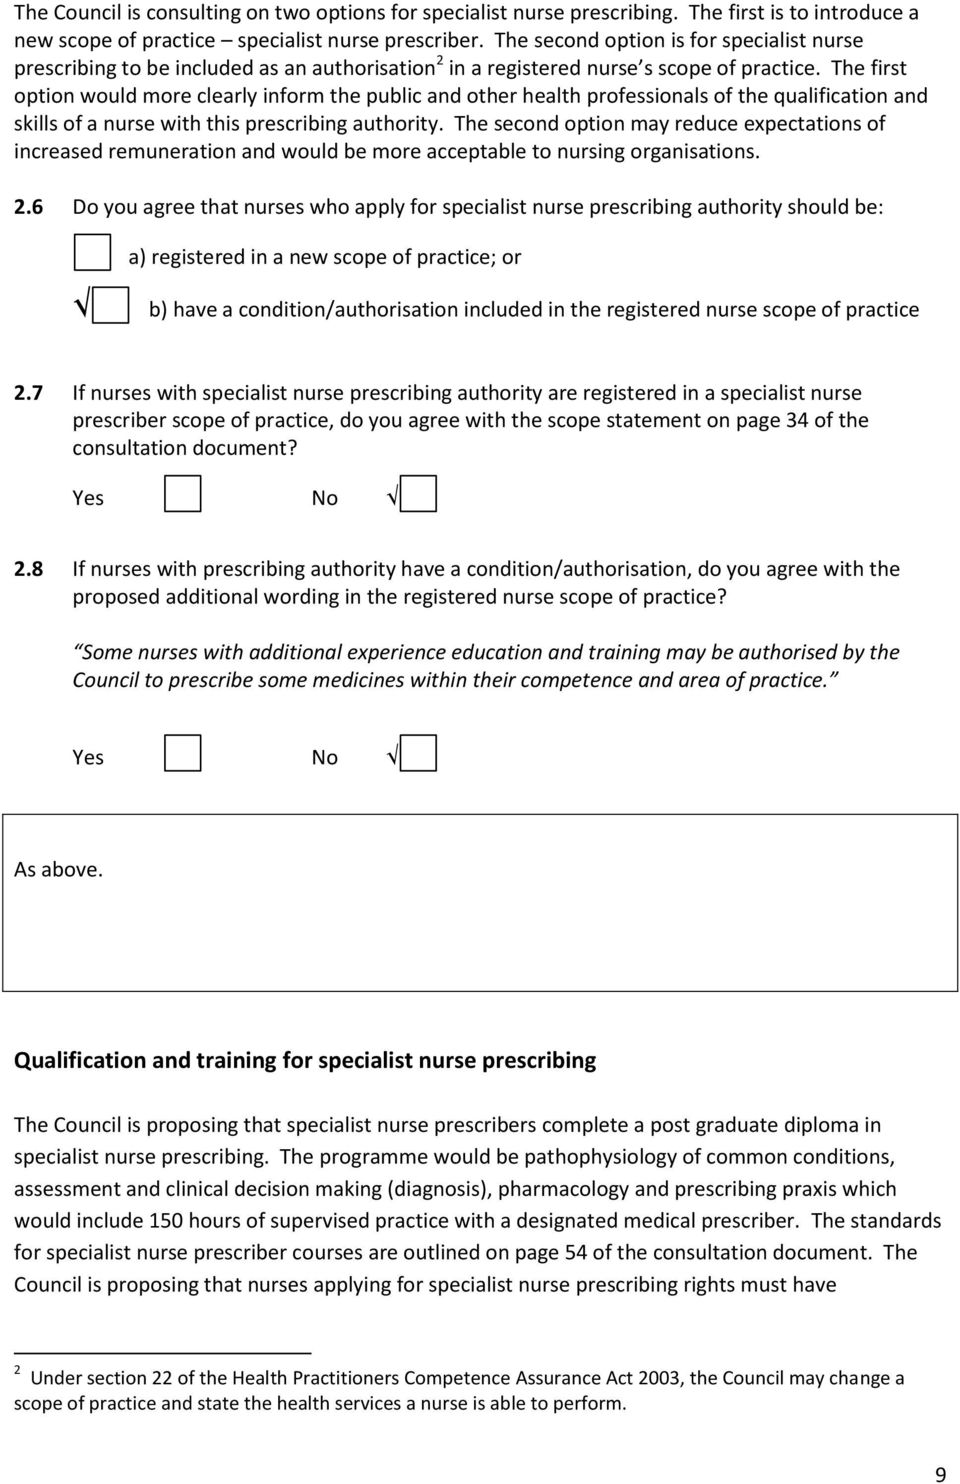 The first option would more clearly inform the public and other health professionals of the qualification and skills of a nurse with this prescribing authority.